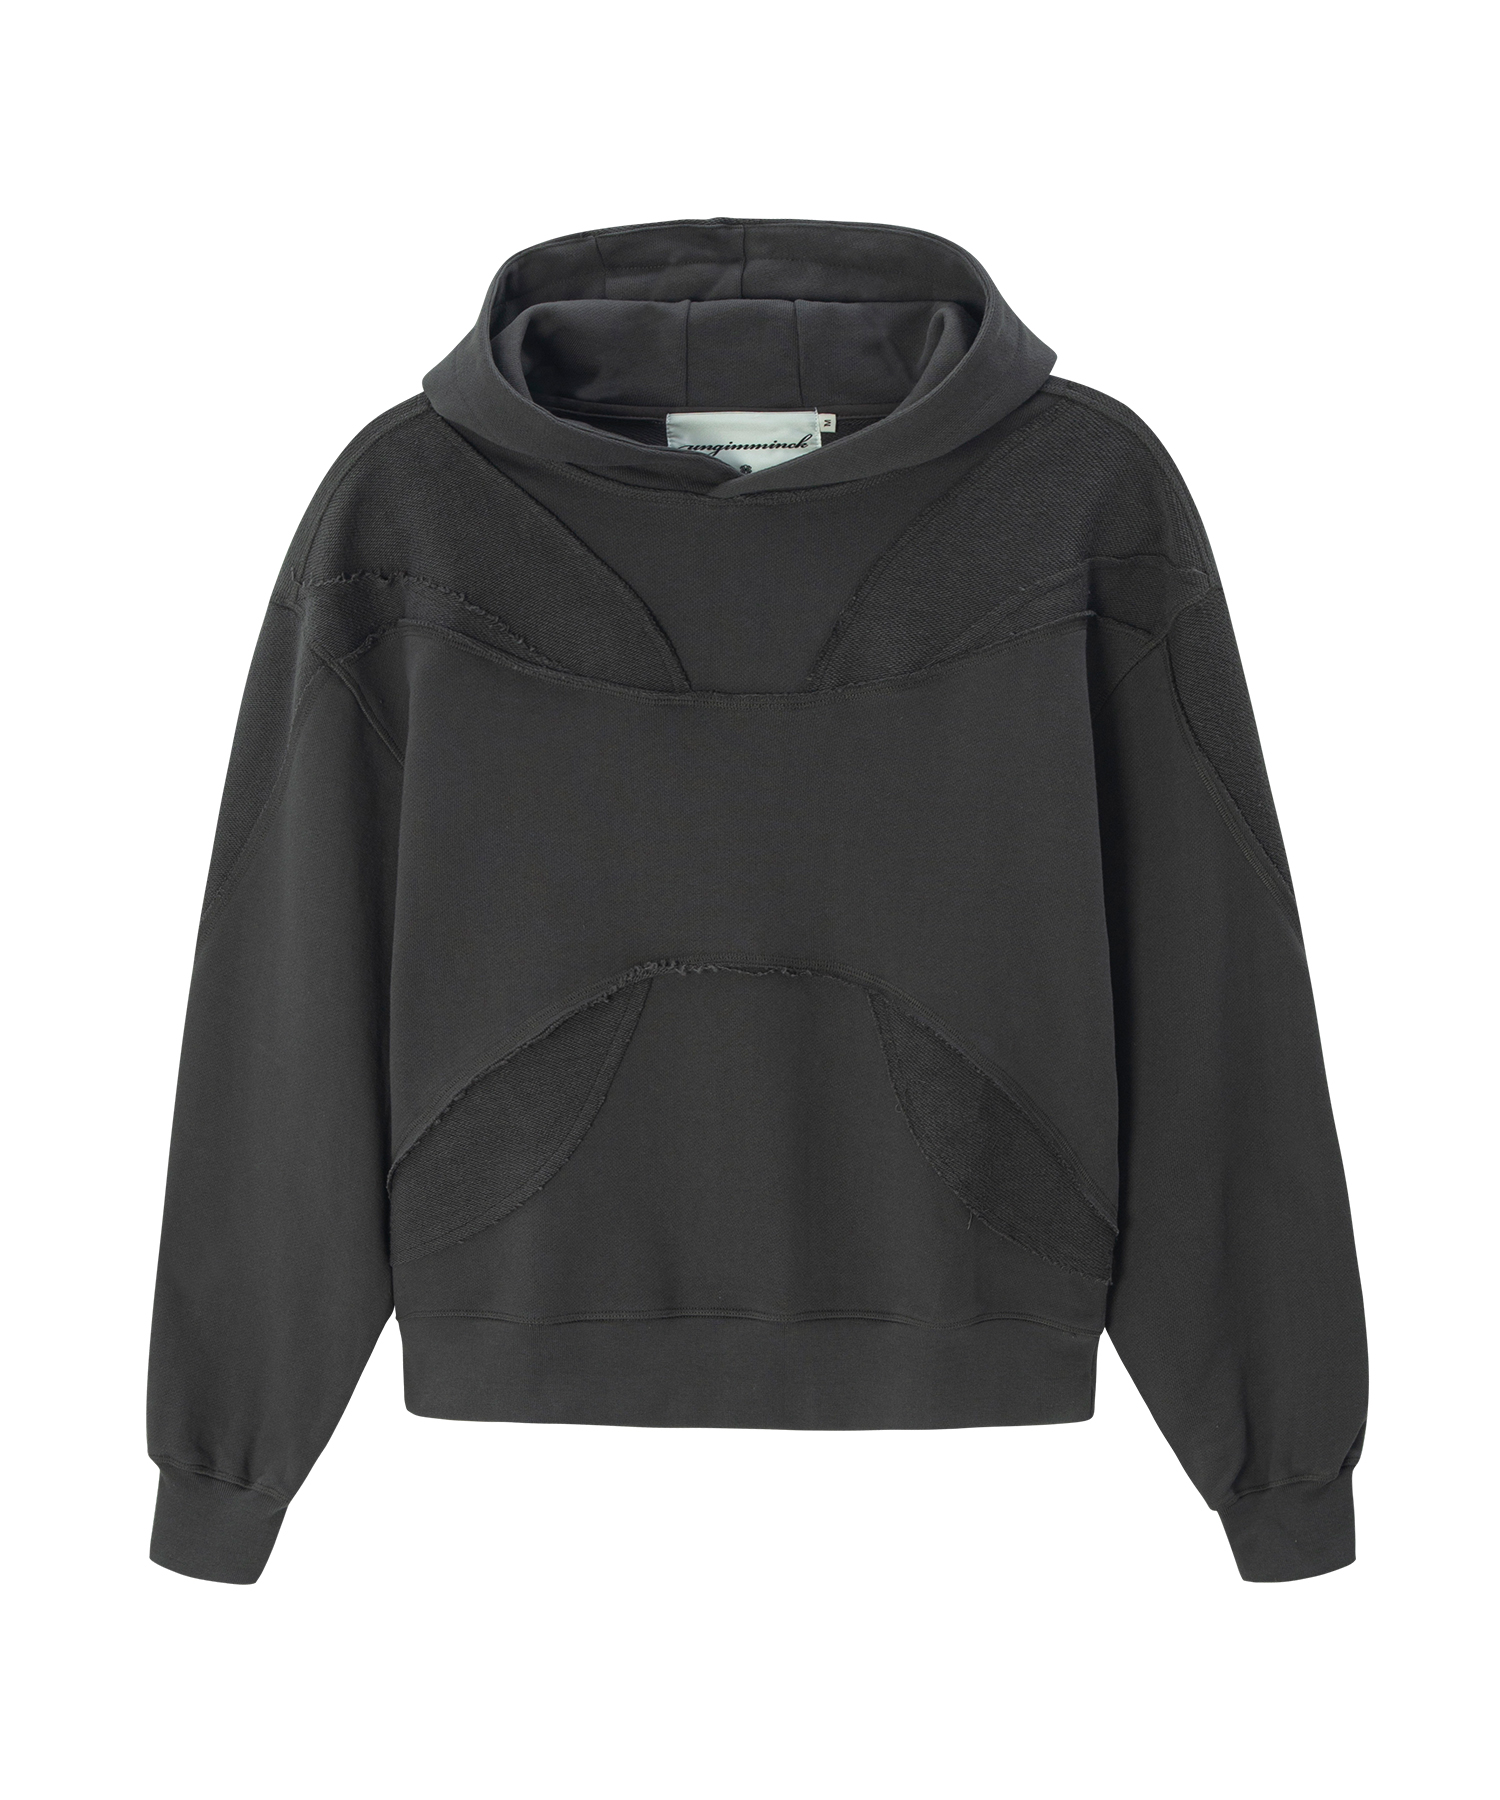 Flipped Fabric Contras Hoodie - Charcoal